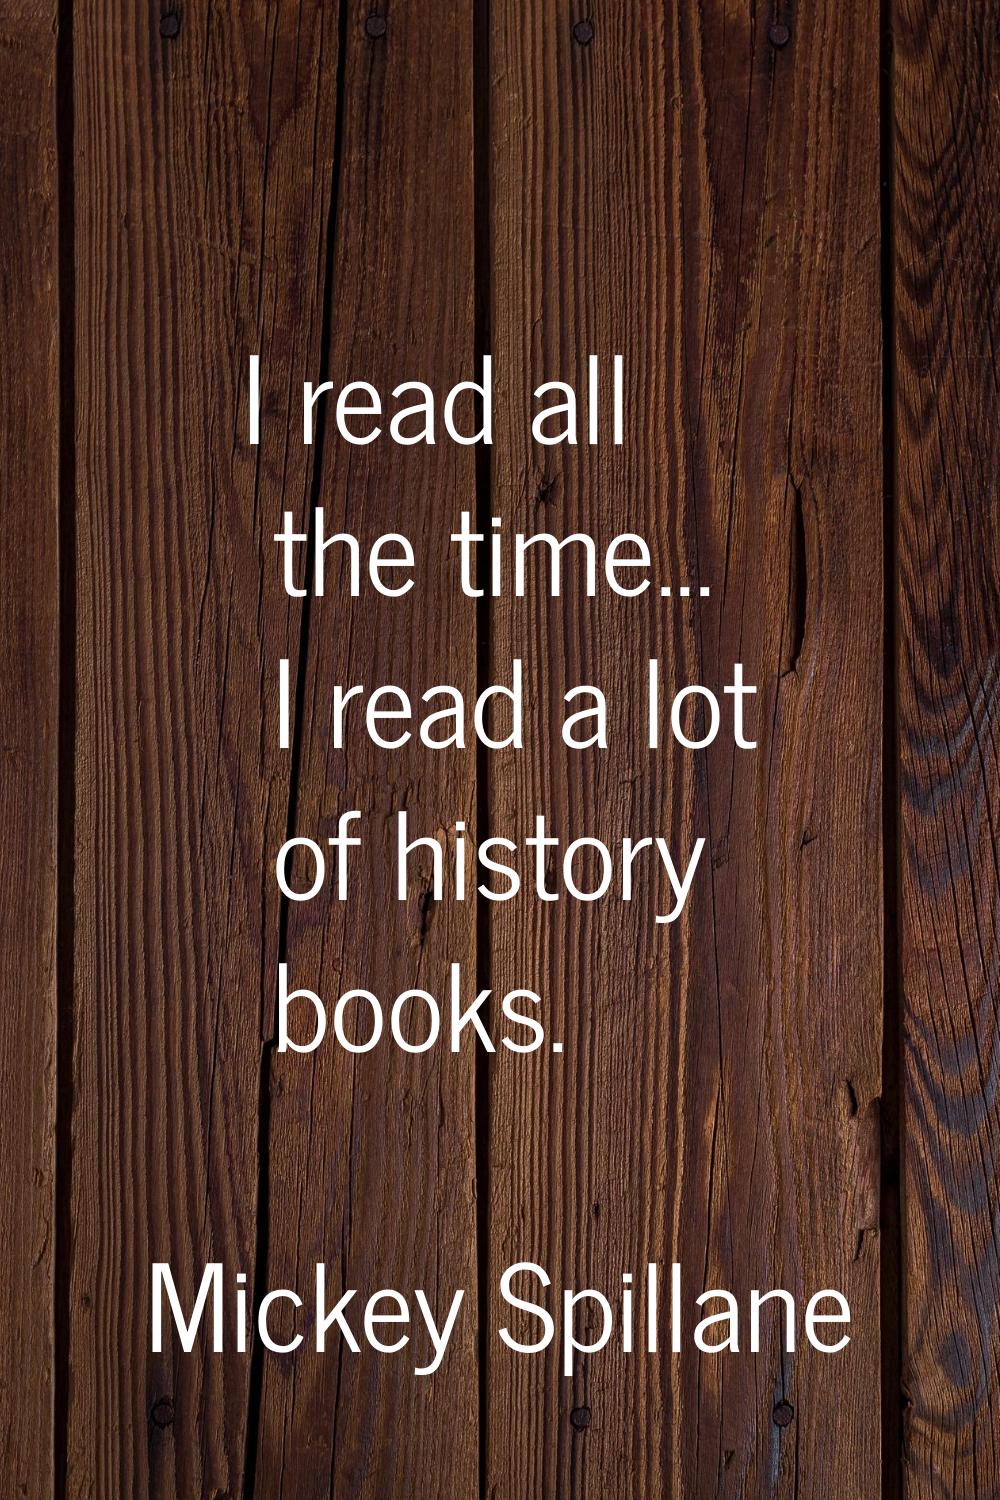 I read all the time... I read a lot of history books.